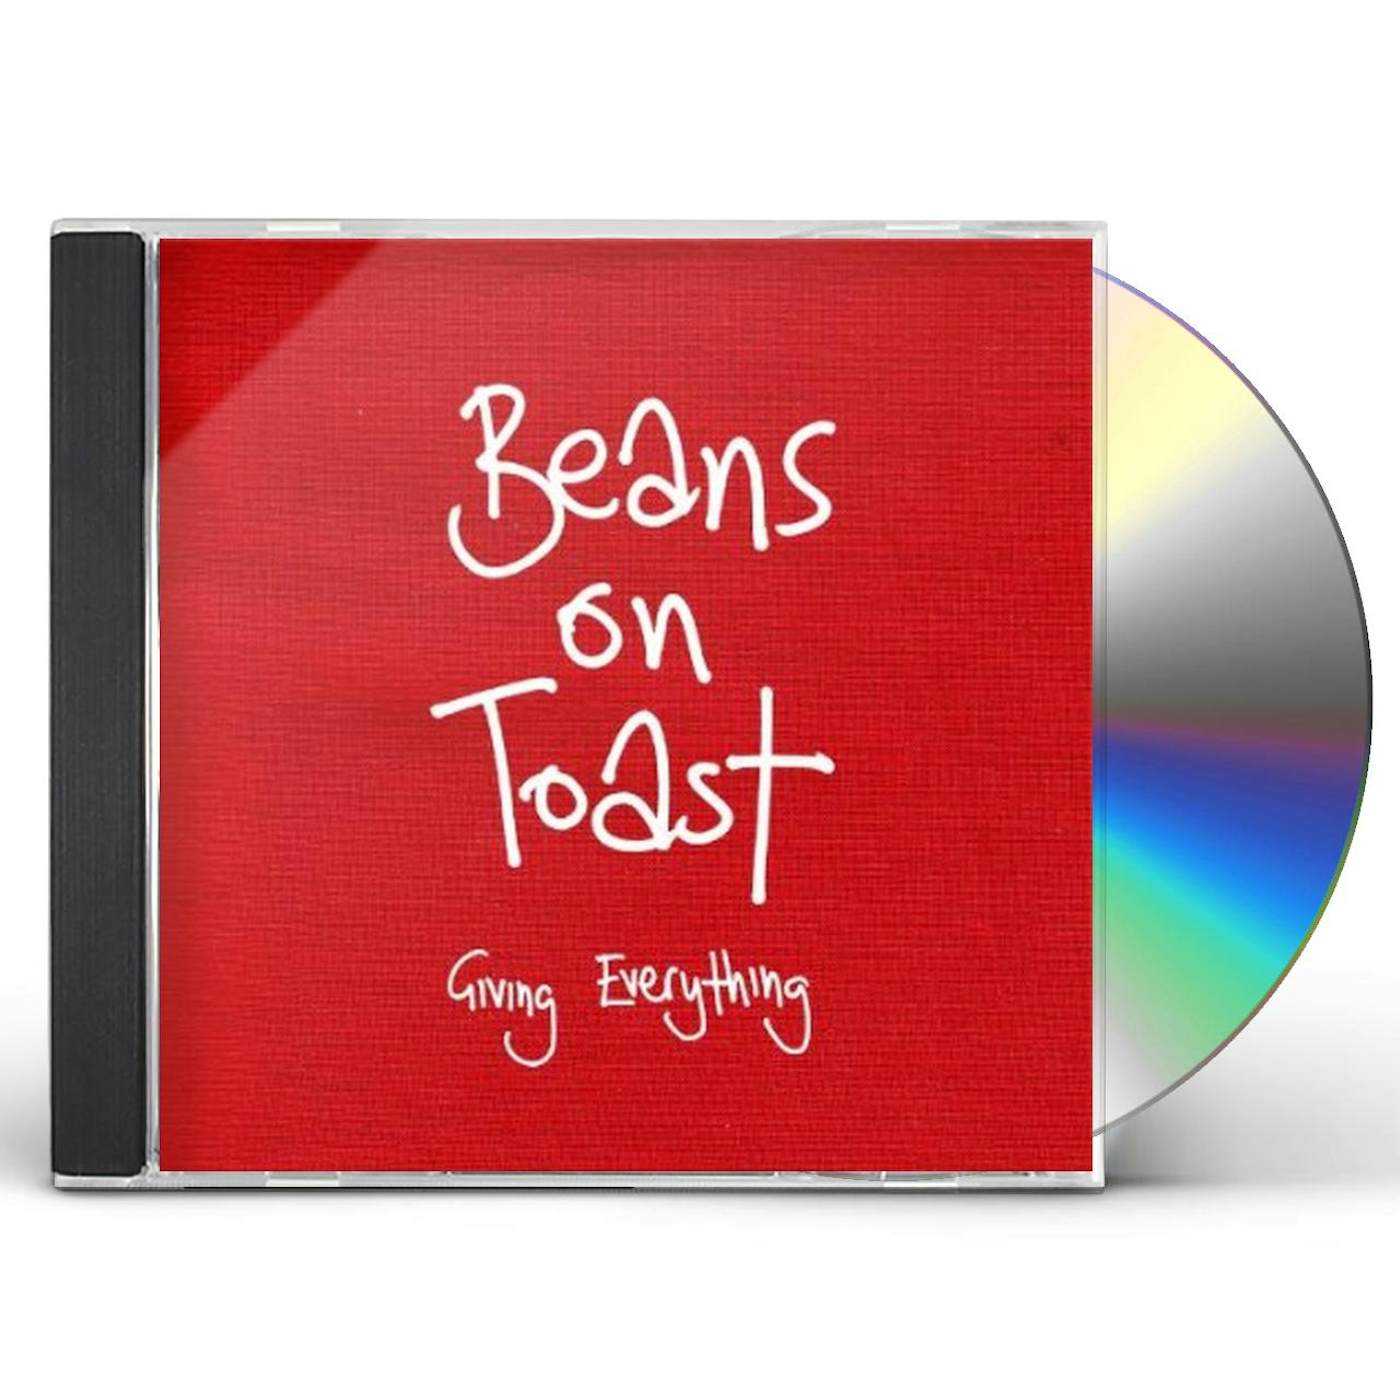 Beans on Toast GIVING EVERYTHING CD